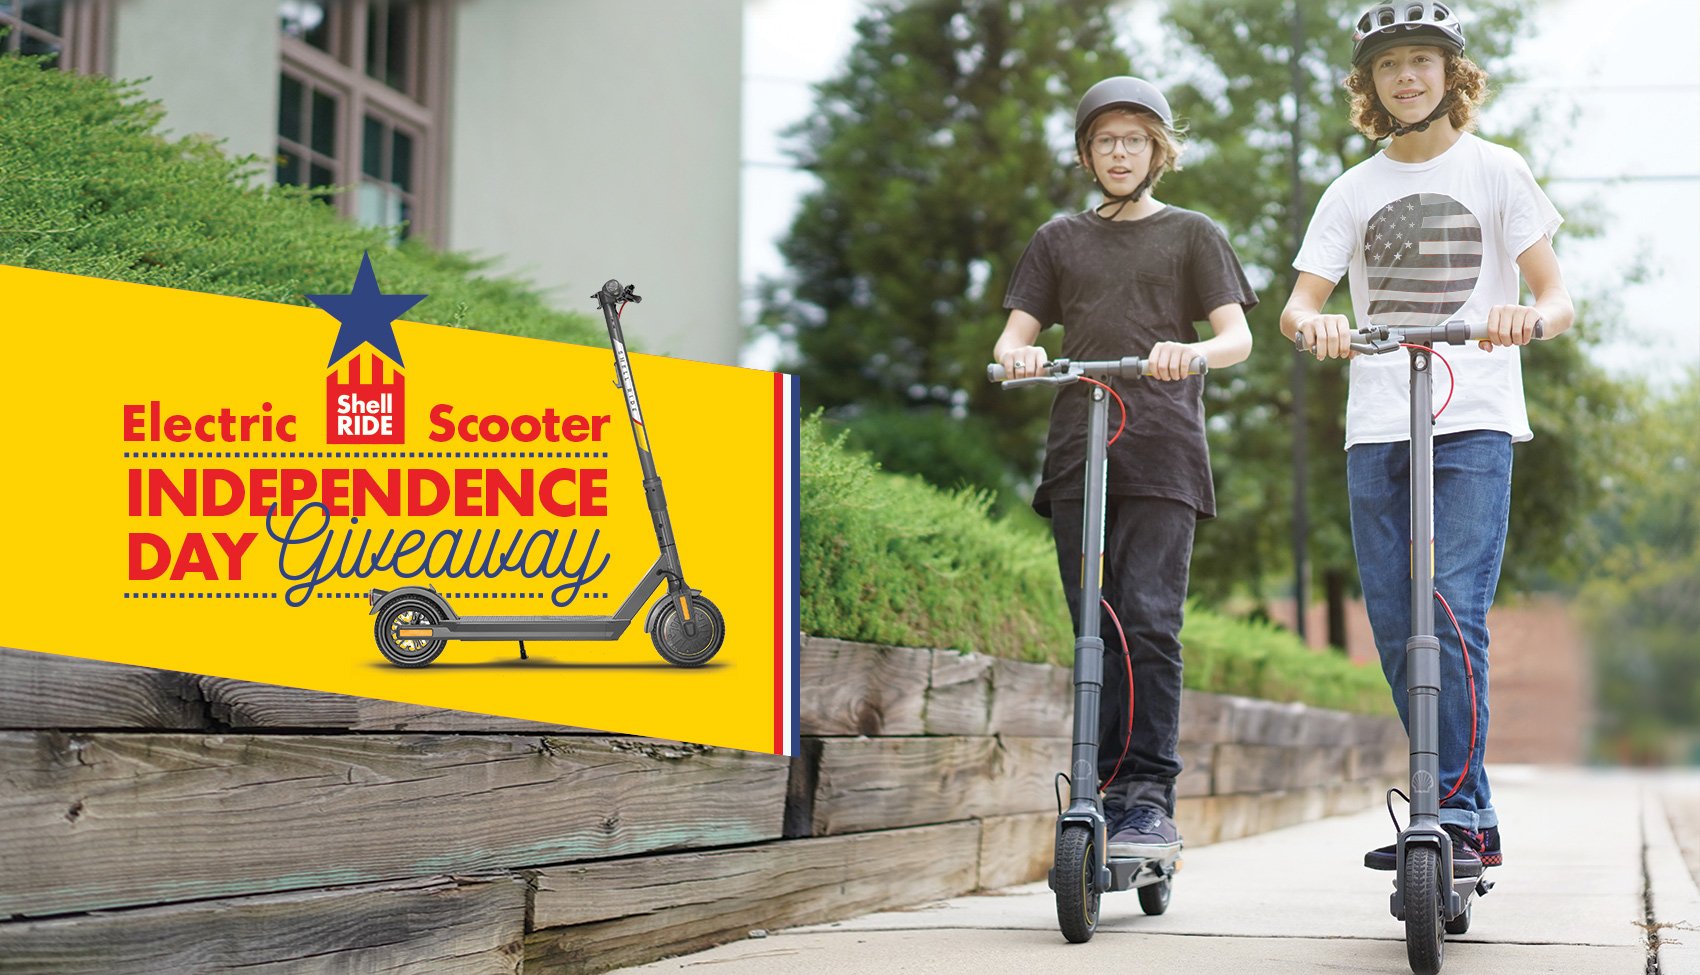 two teenage boys riding electric scooters in a city with an electric scooter independence day giveaway message